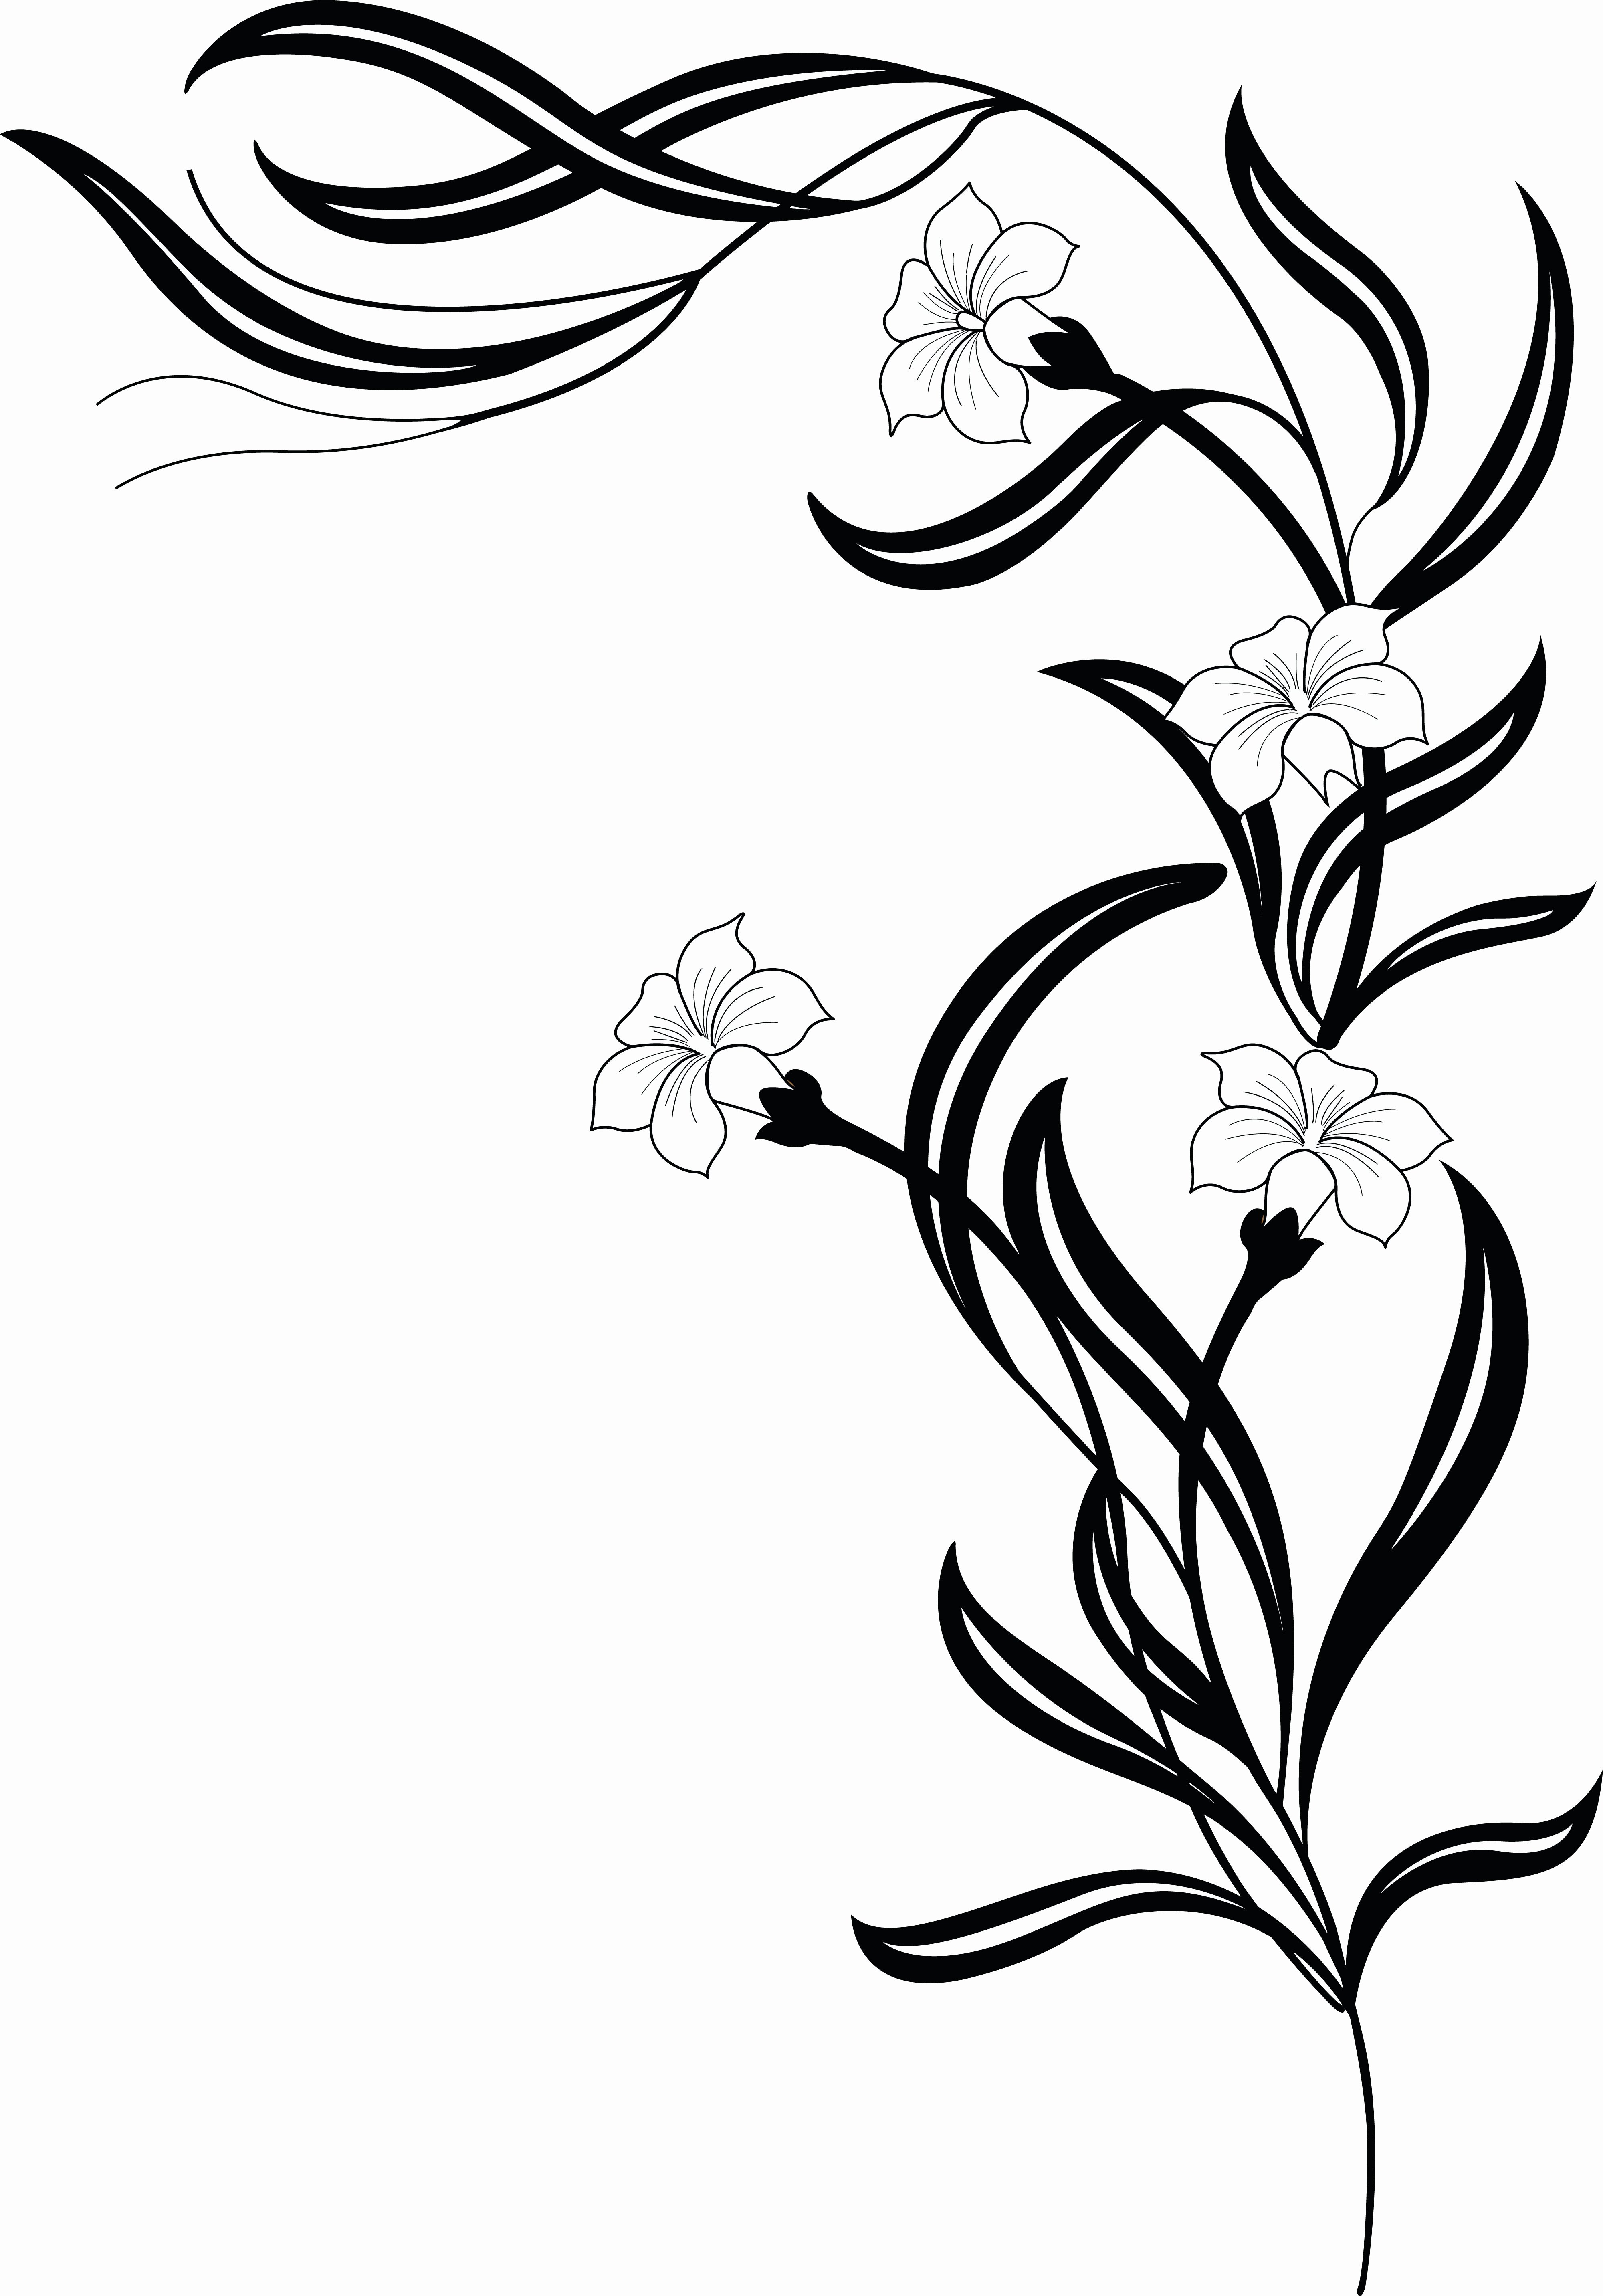 Black and White Flower Drawing New Free Clipart A Grayscale Floral Vine